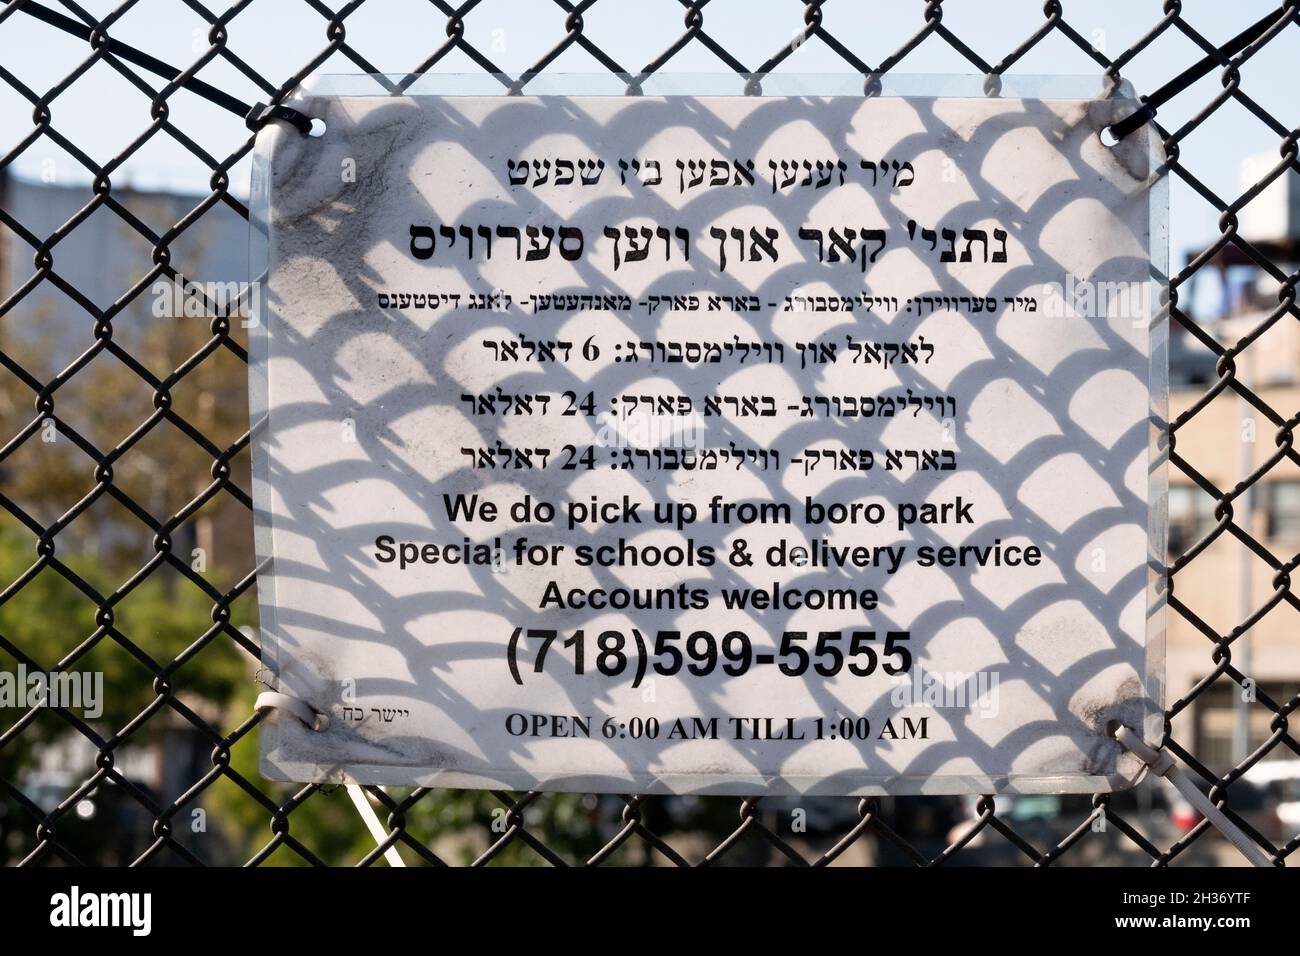 A bilingual advertisement in Yiddish and English, for a car & van service primarily used by orthodox Jews. On Lee Ave in Williamsburg, Brooklyn, NYC. Stock Photo